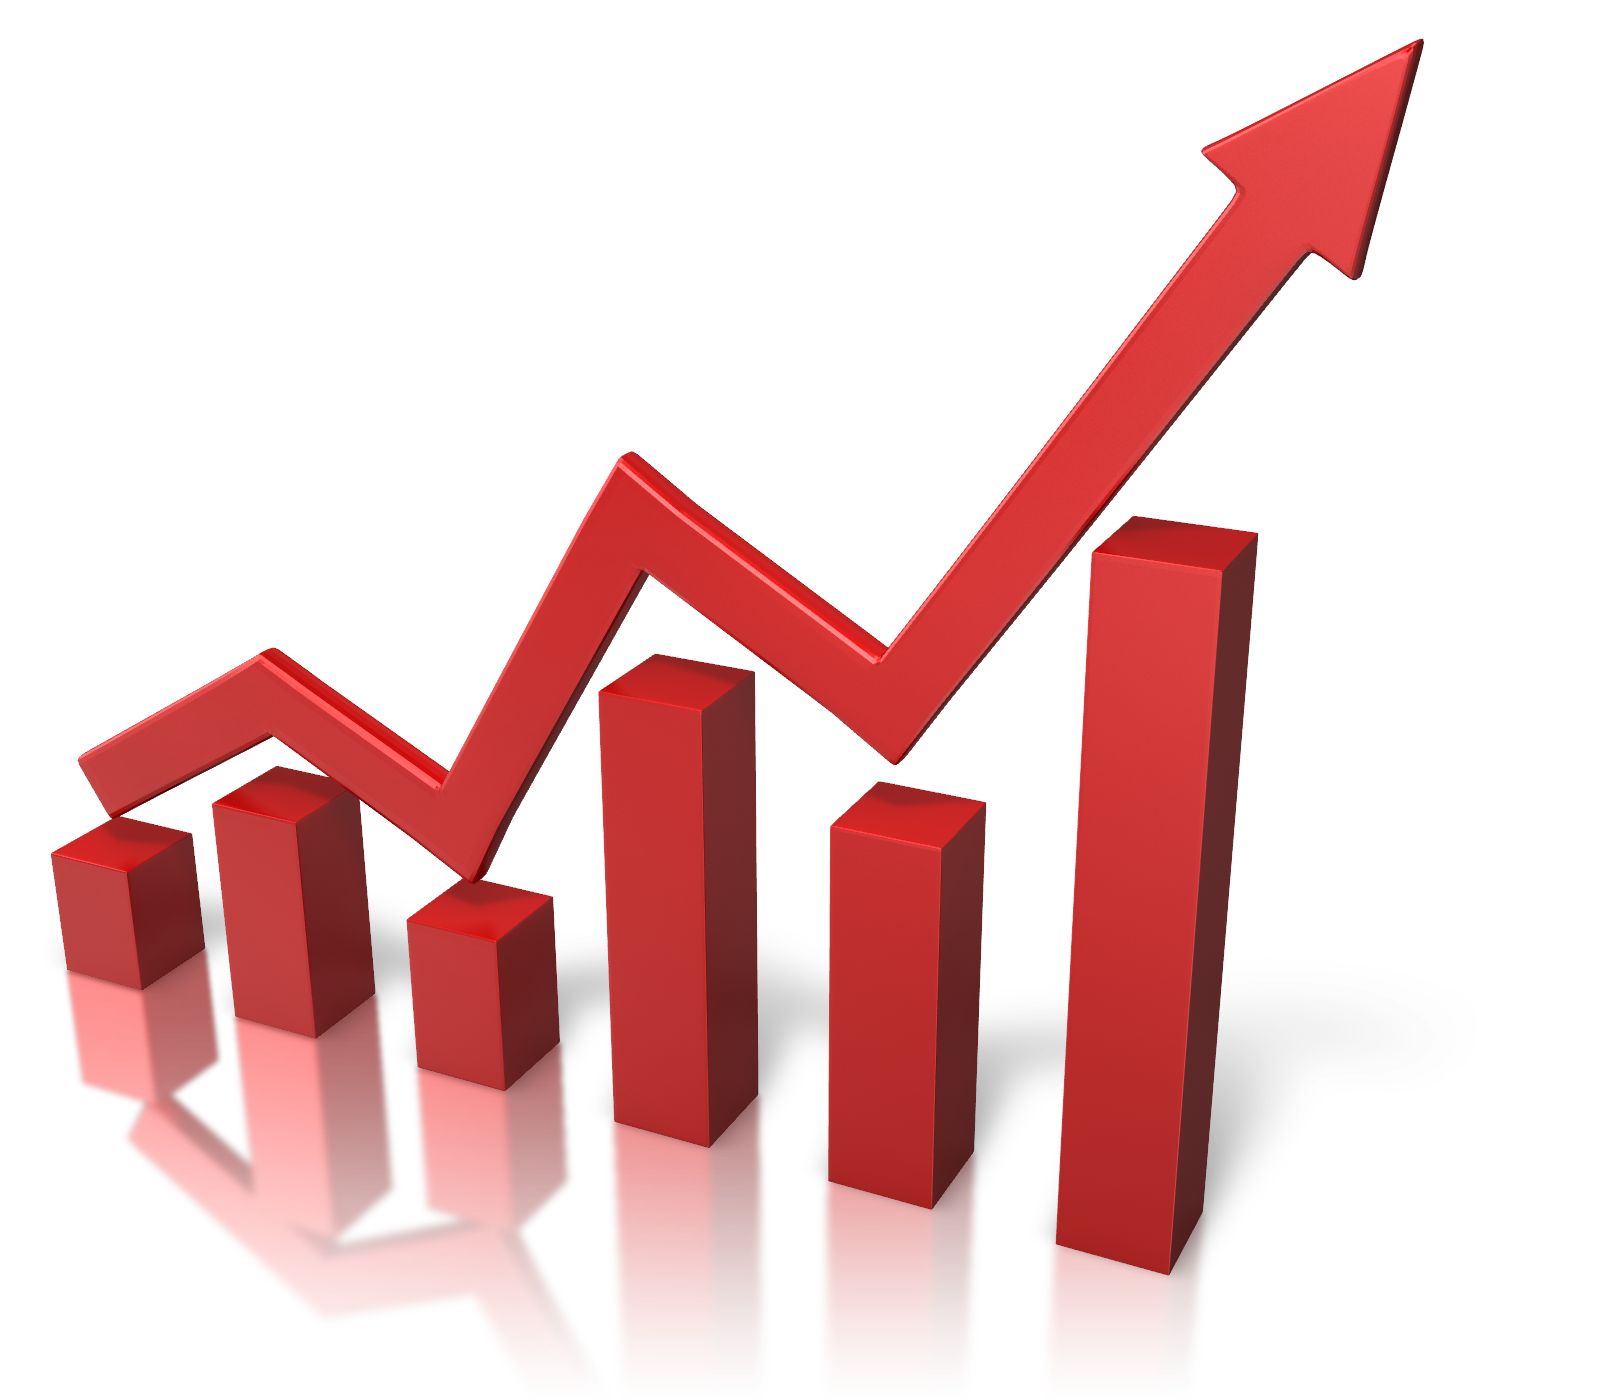 Business Growth Chart PNG Transparent Images PNG All